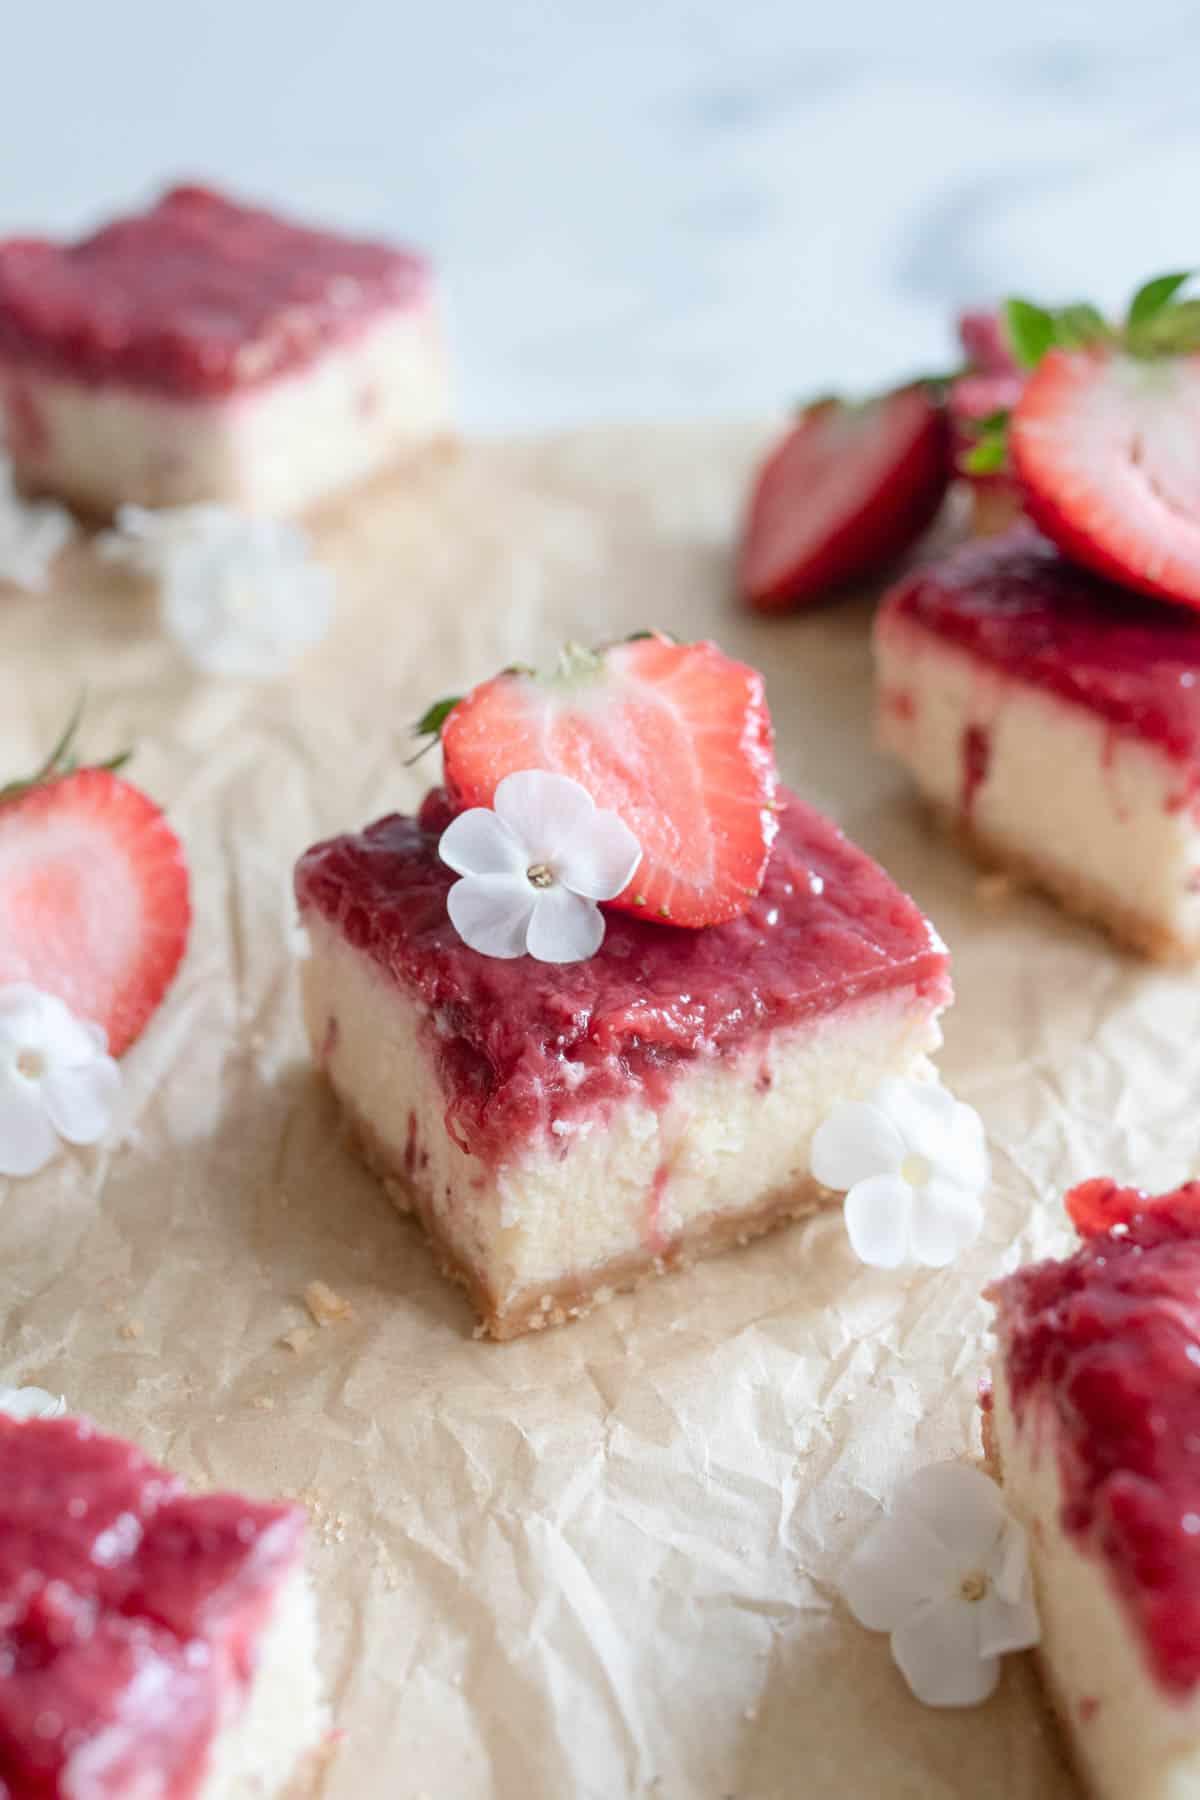 A cheesecake bar topped with strawberries and a white flower on top of brown parchment paper.